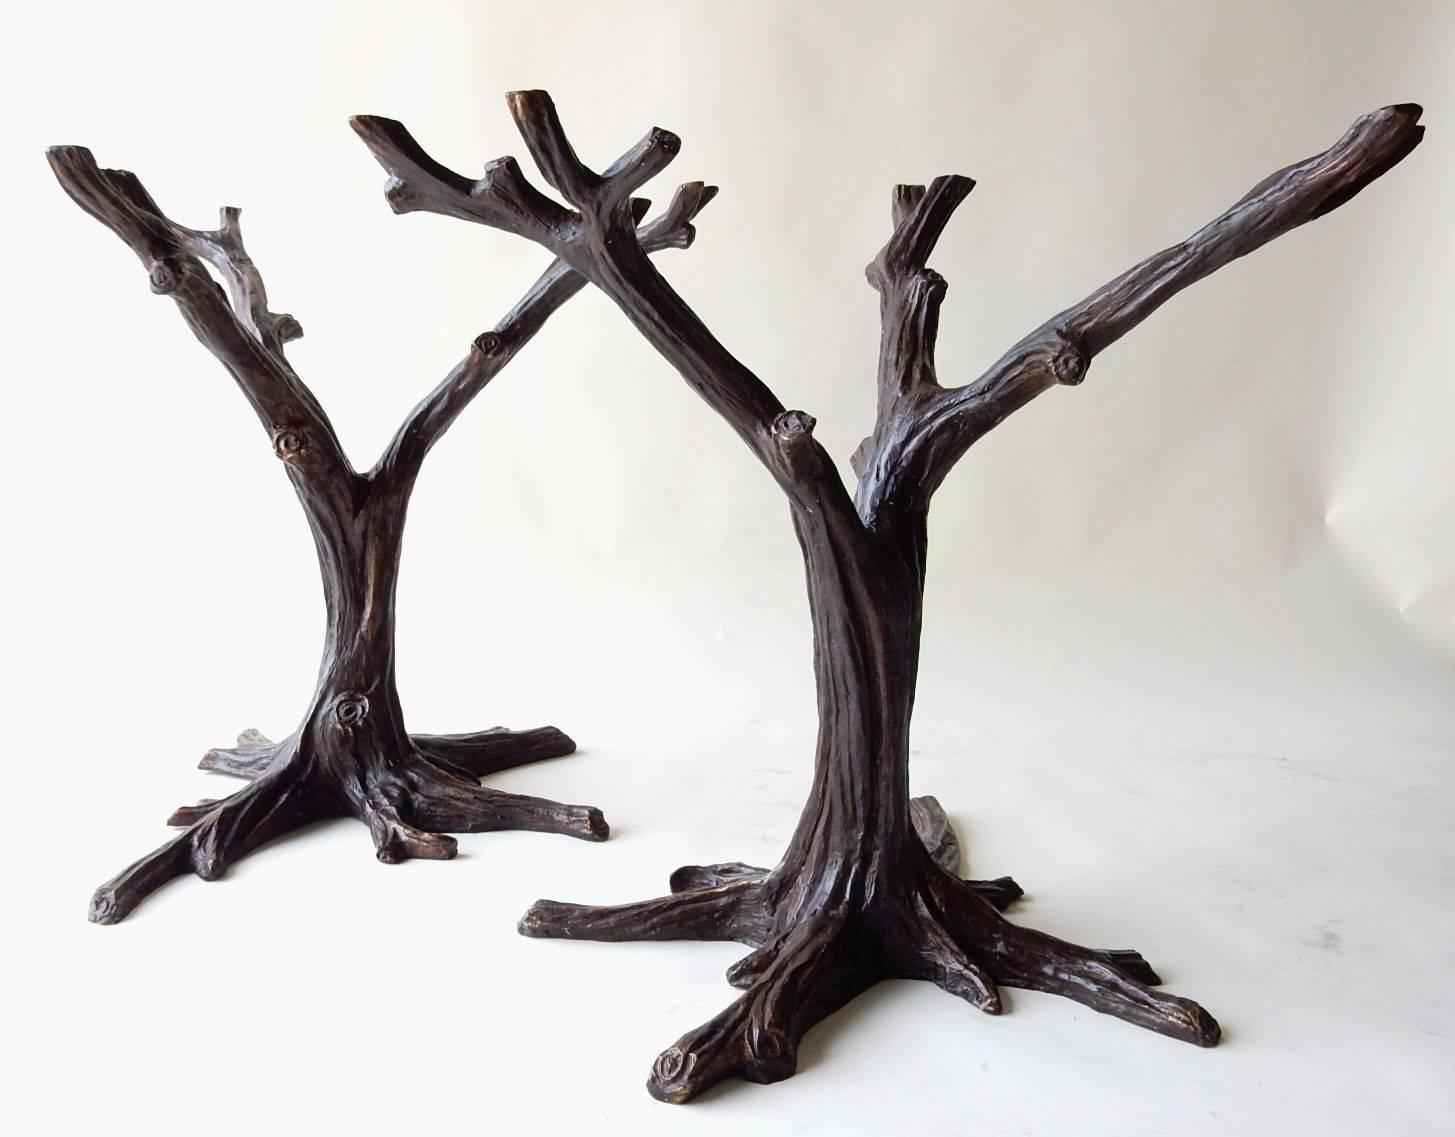 French cast bronze tree sculpture dining table base signed J. A. Mercie
A stunning organic design element for the eclectic home.
Sold individually (Two available)
They stand 30 in tall X 32 in wide.